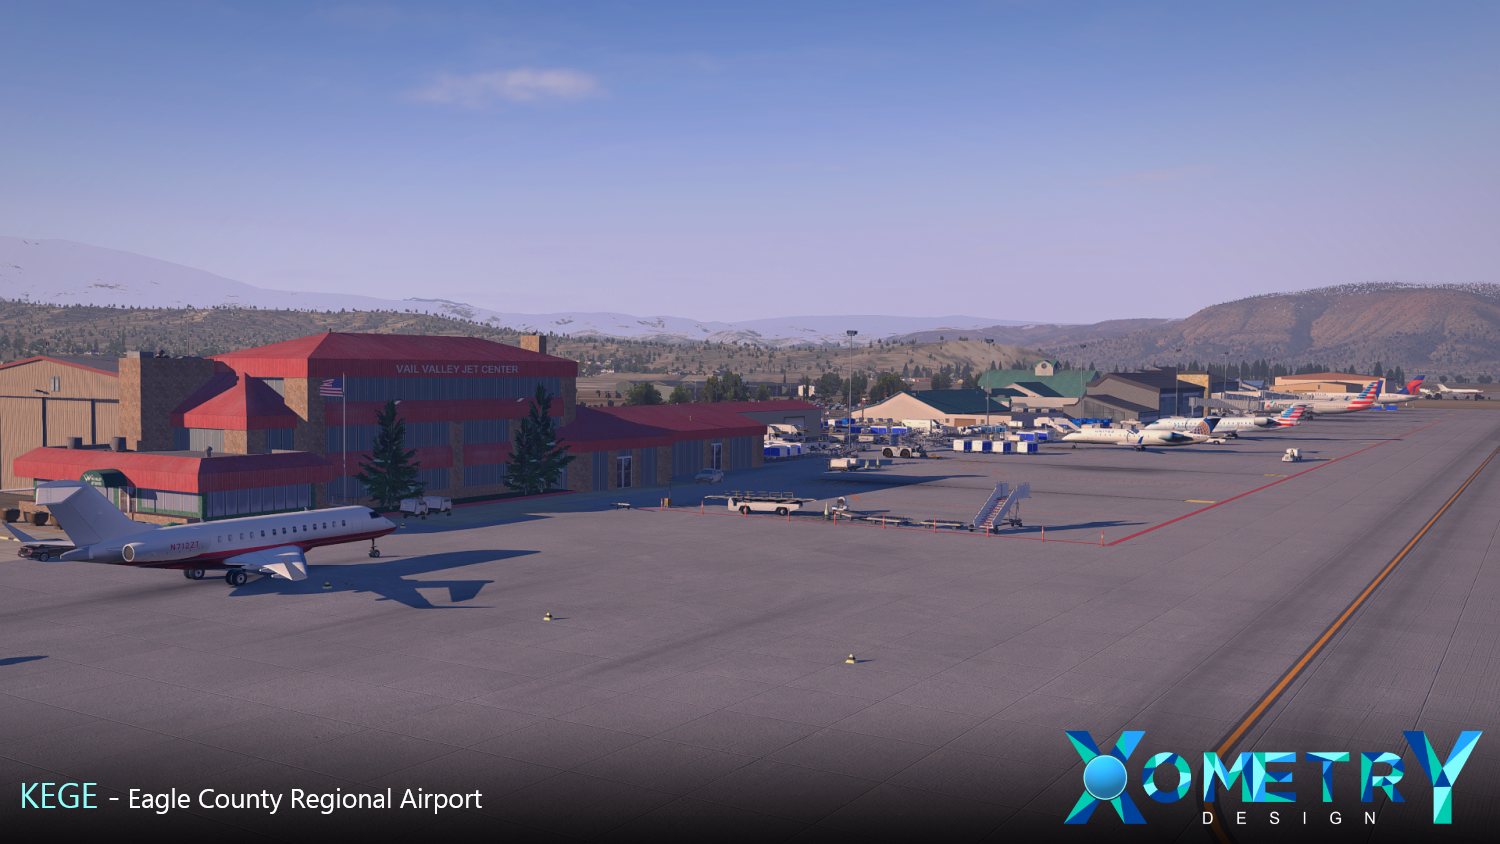 Xometry Announces Eagle County Regional Airport for X-Plane 11 - IniBuilds, X-Plane, Xometry